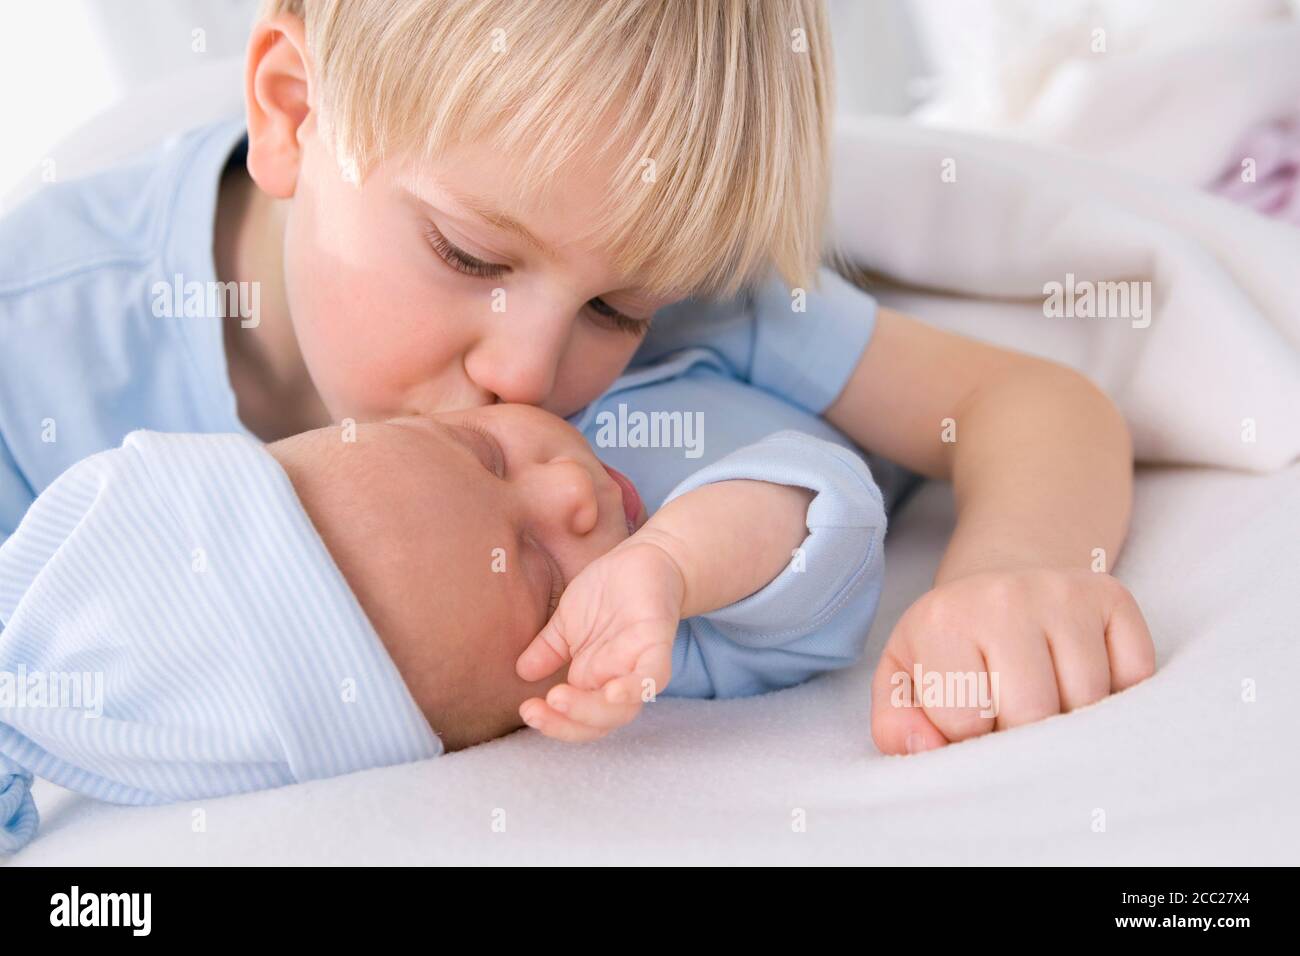 Baby girl (2 months) with boy (4-5 years), portrait Stock Photo